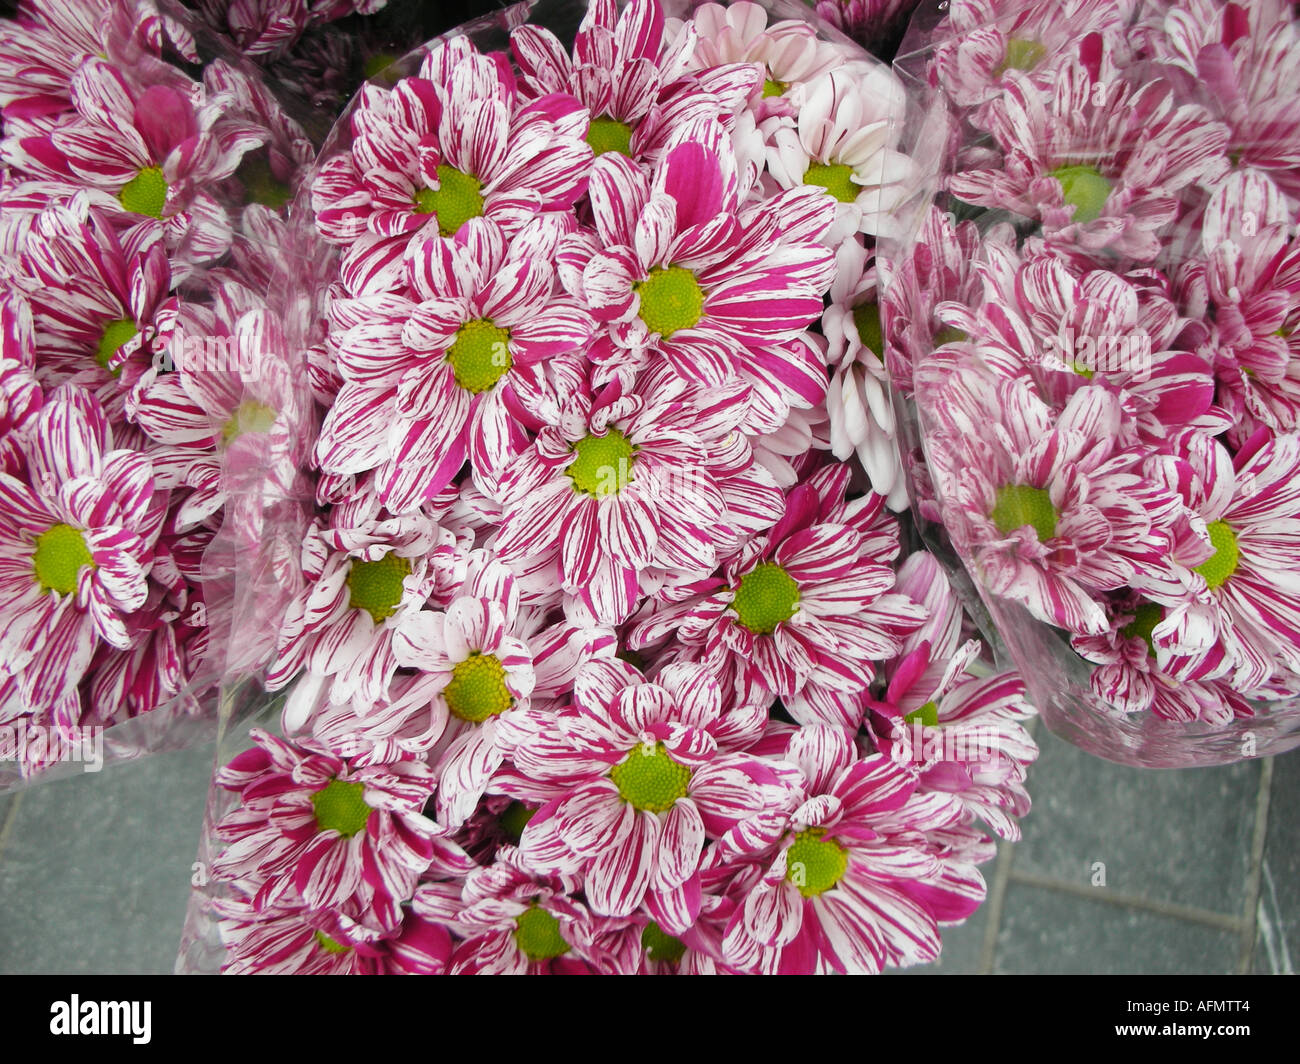 Bunch of purple and white daisies at market stall display Stock Photo